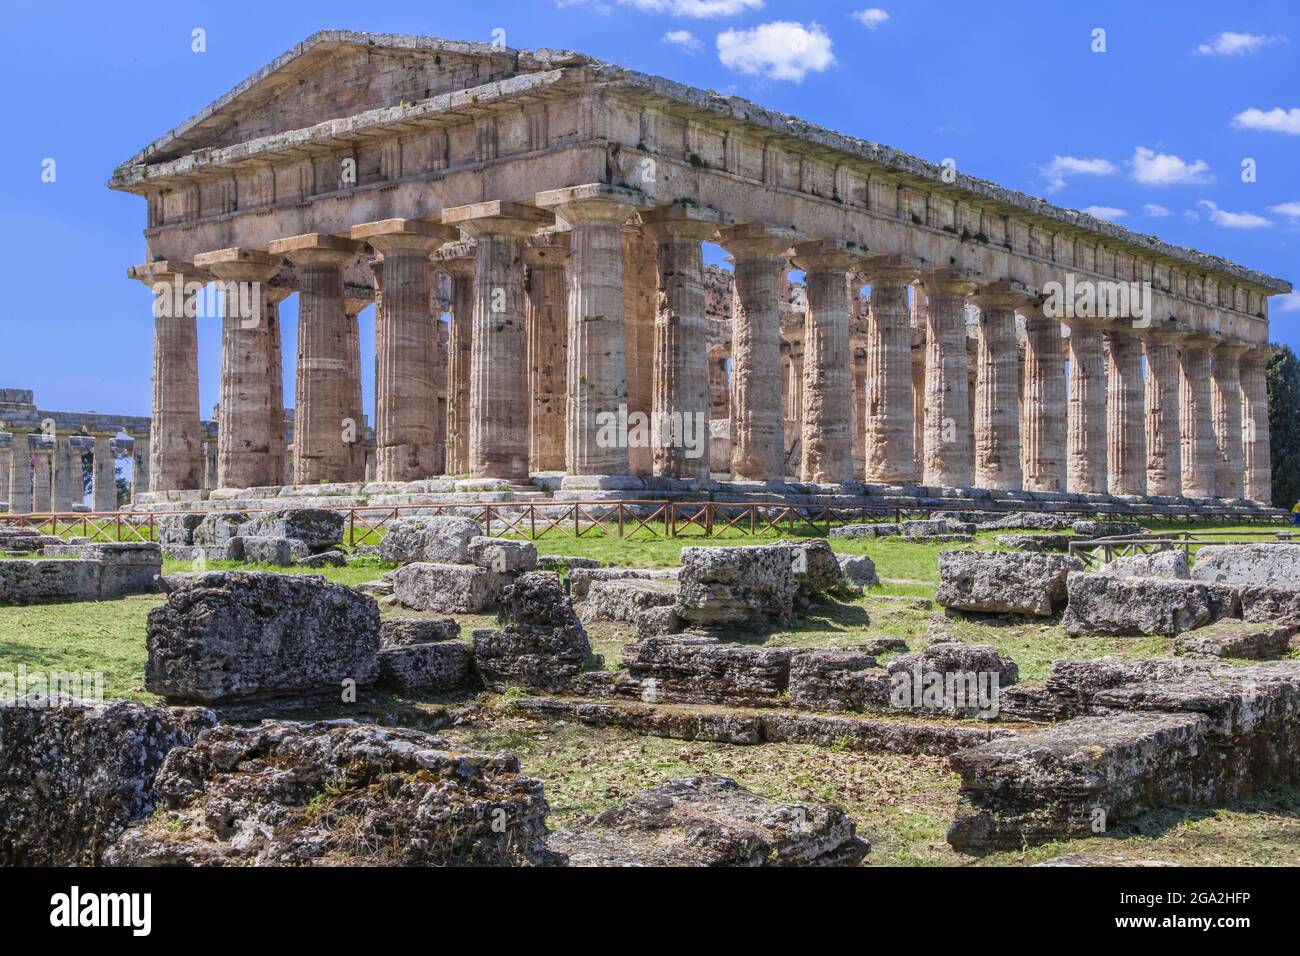 Second Temple of Hera, ancient Greek Temples of Paestum in Magna Graecia (Southern Italy); Paestum, Province of Salerno, Italy Stock Photo